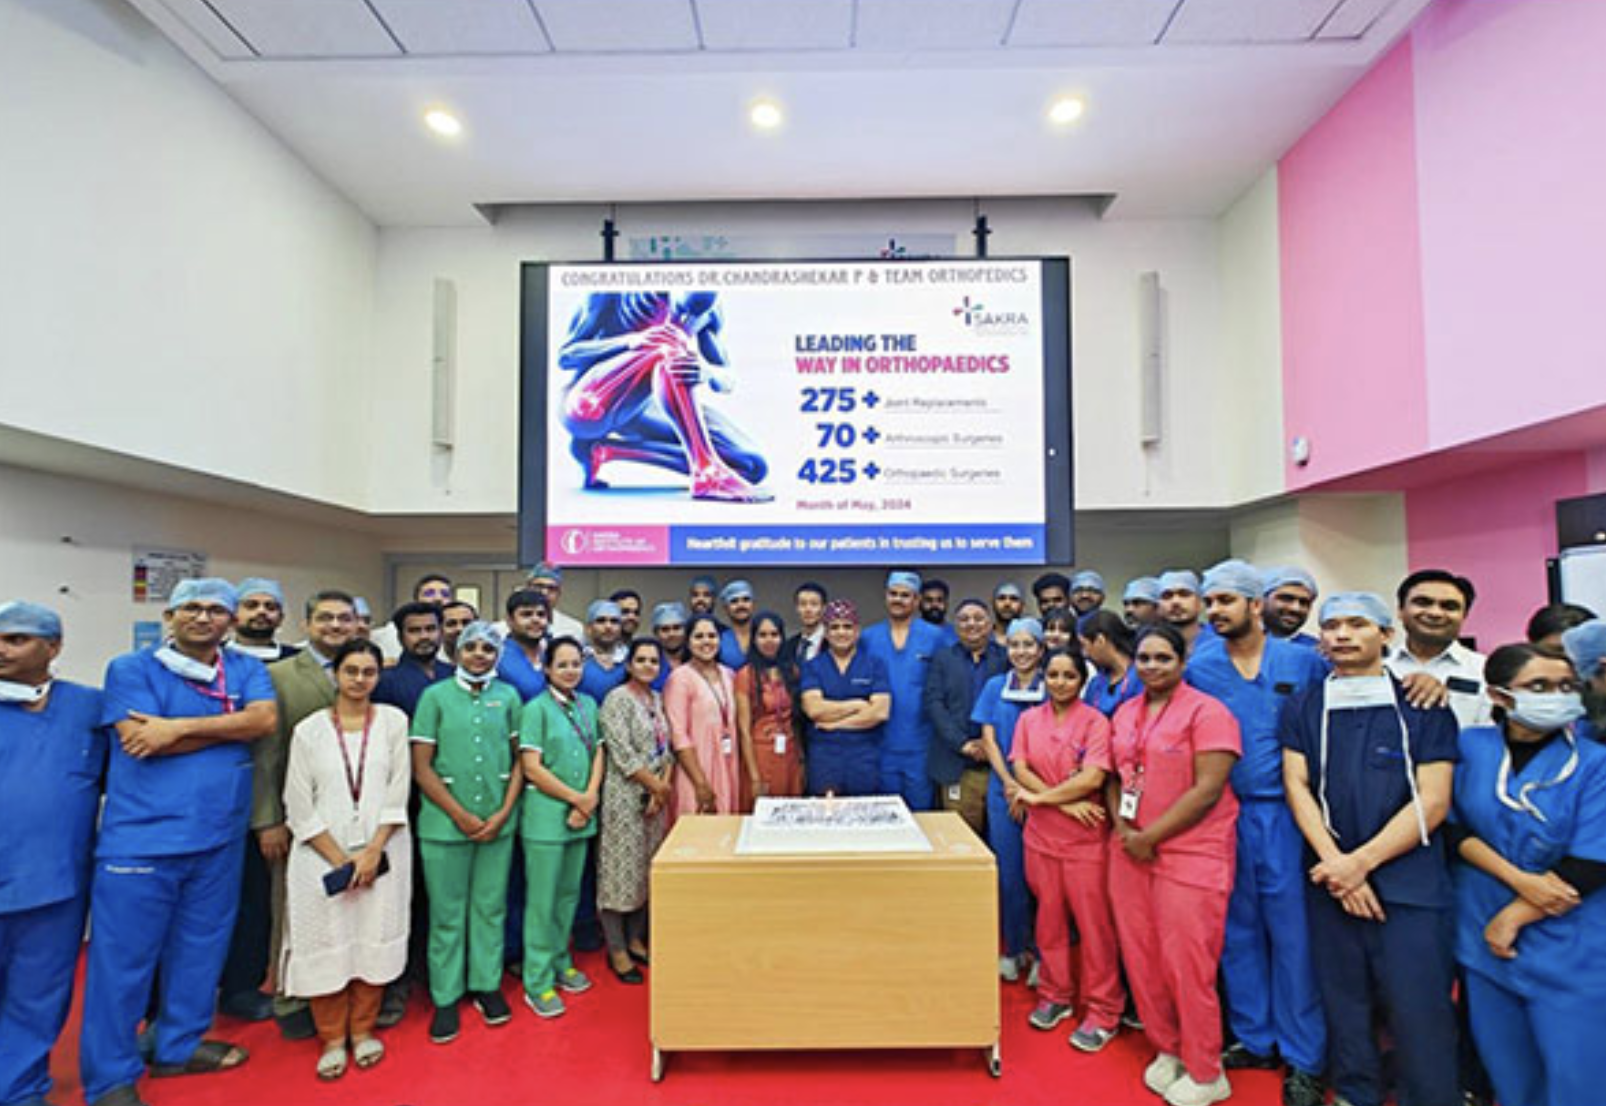 sakra-world-hospital-breaks-records-with-275-joint-replacement-surgeries-in-may